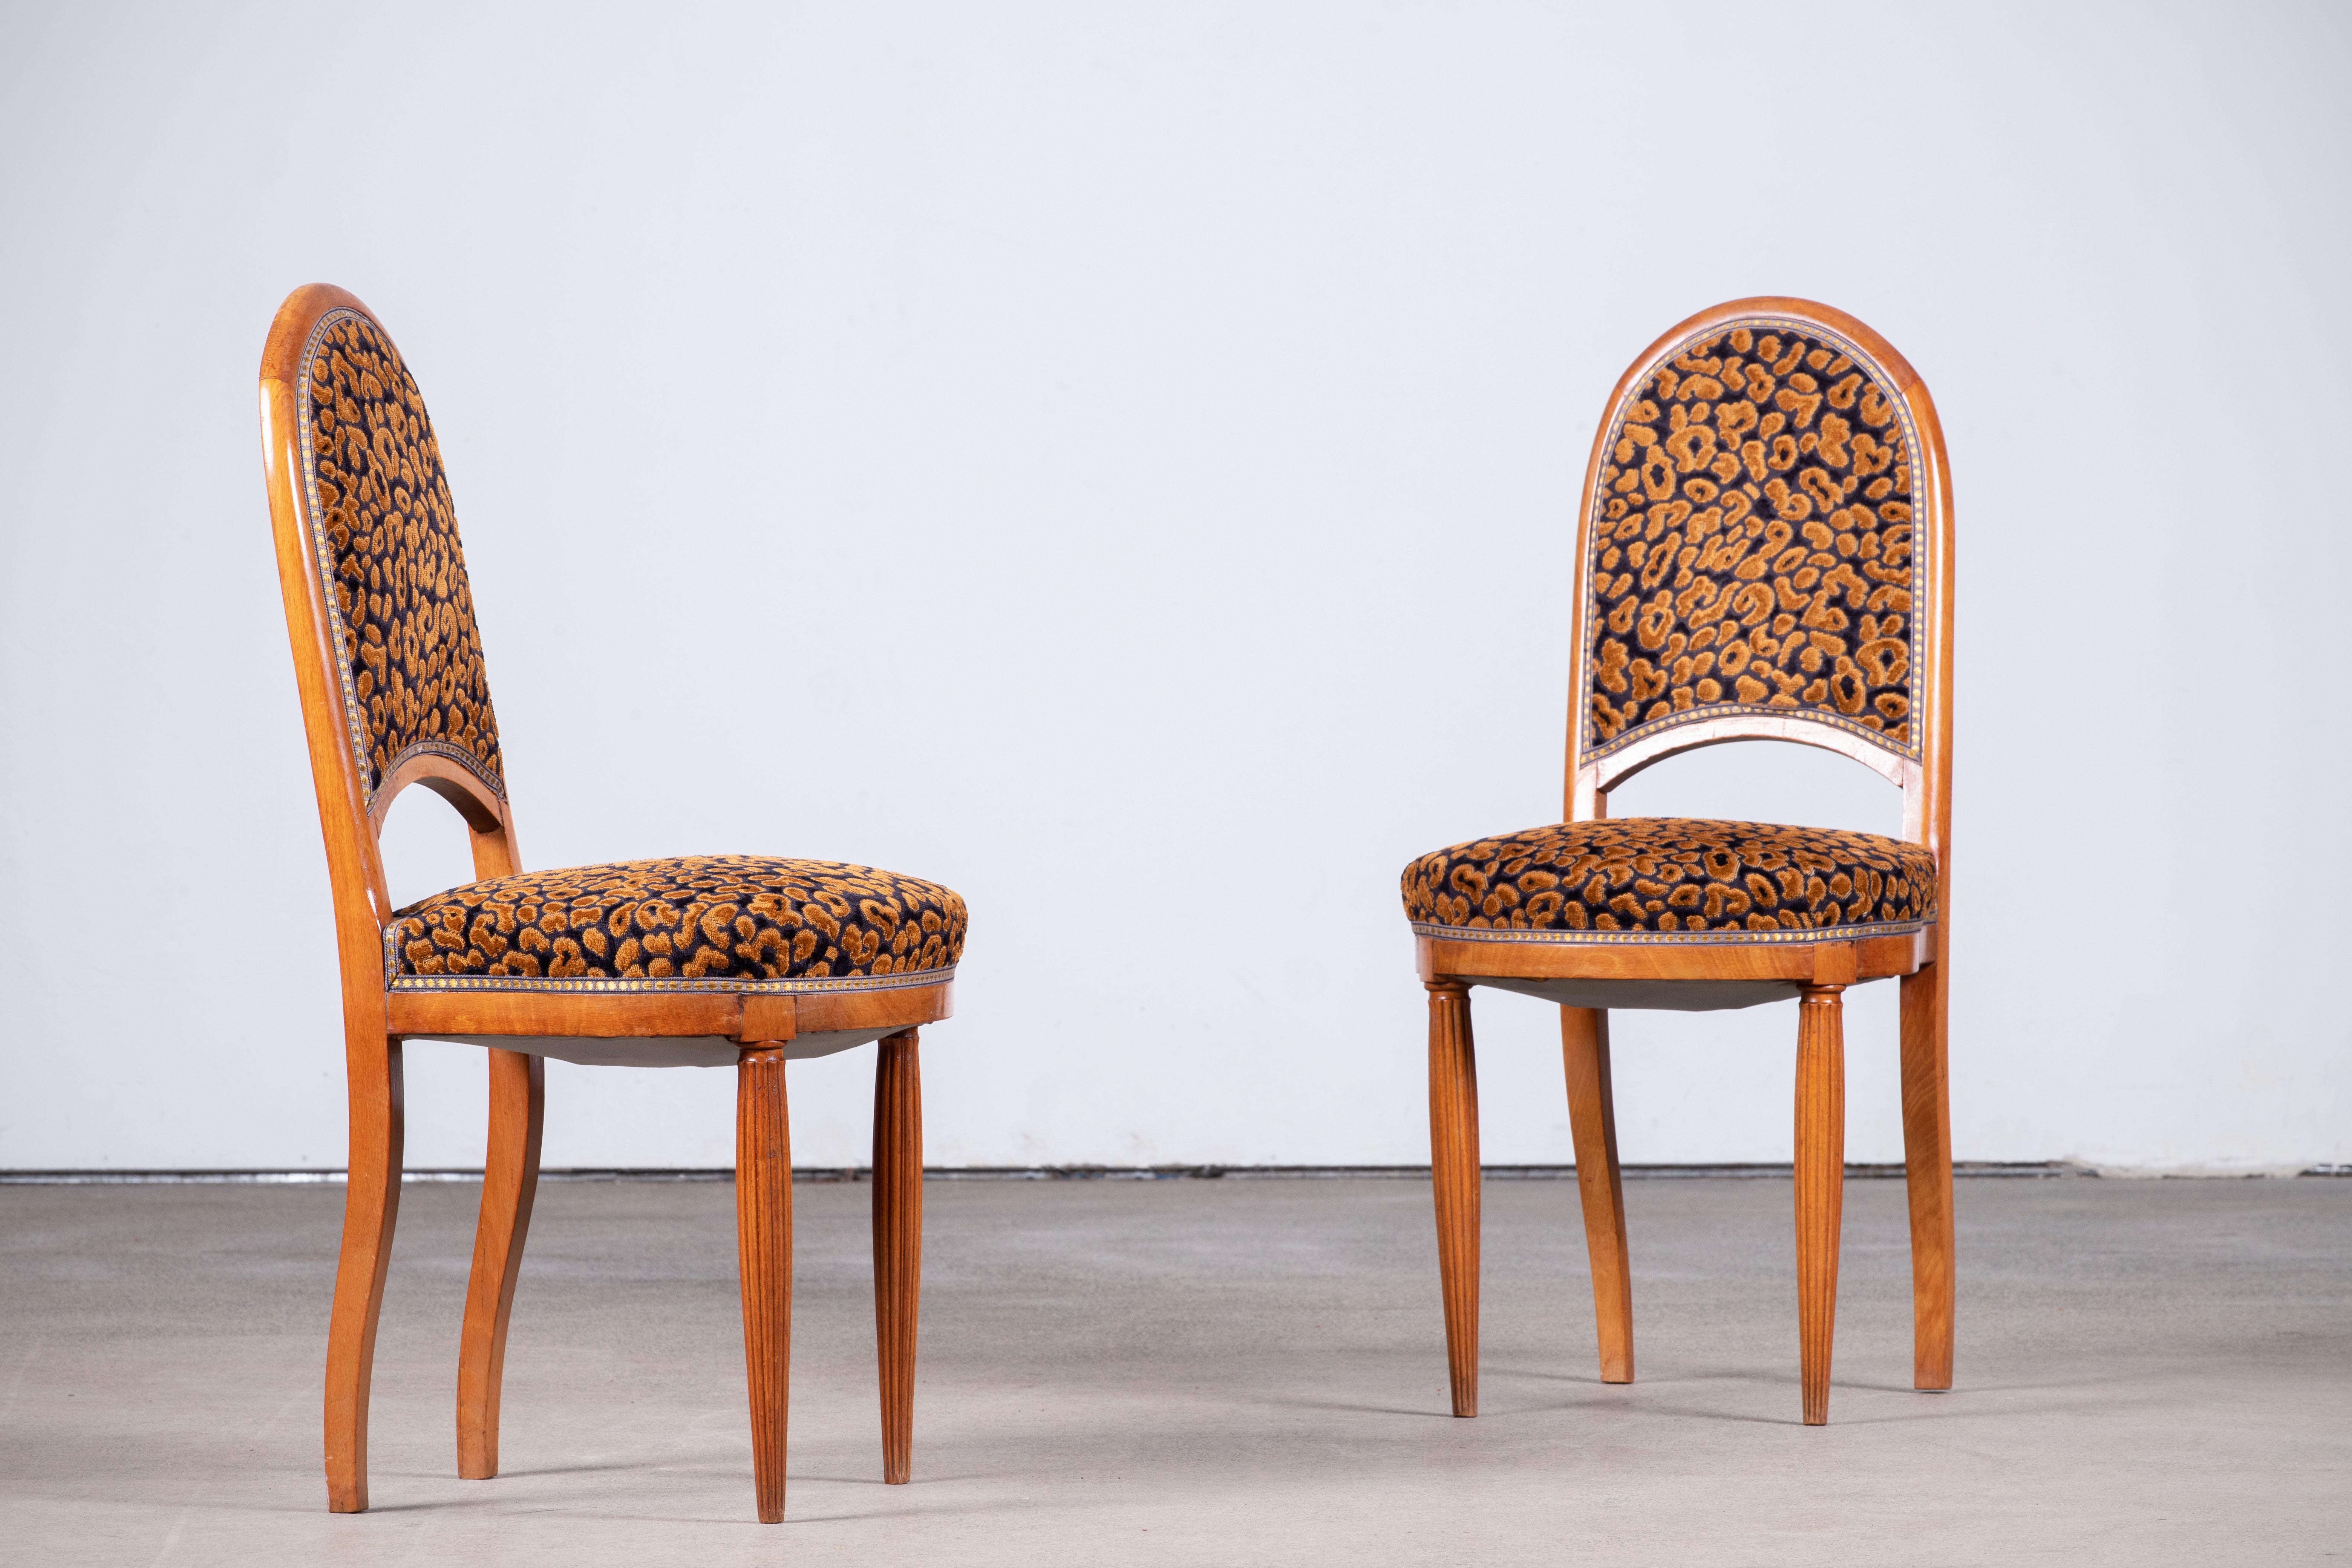 Mid-20th Century Pair of Art Deco Chairs Att. Maurice Jallot, c1940 For Sale